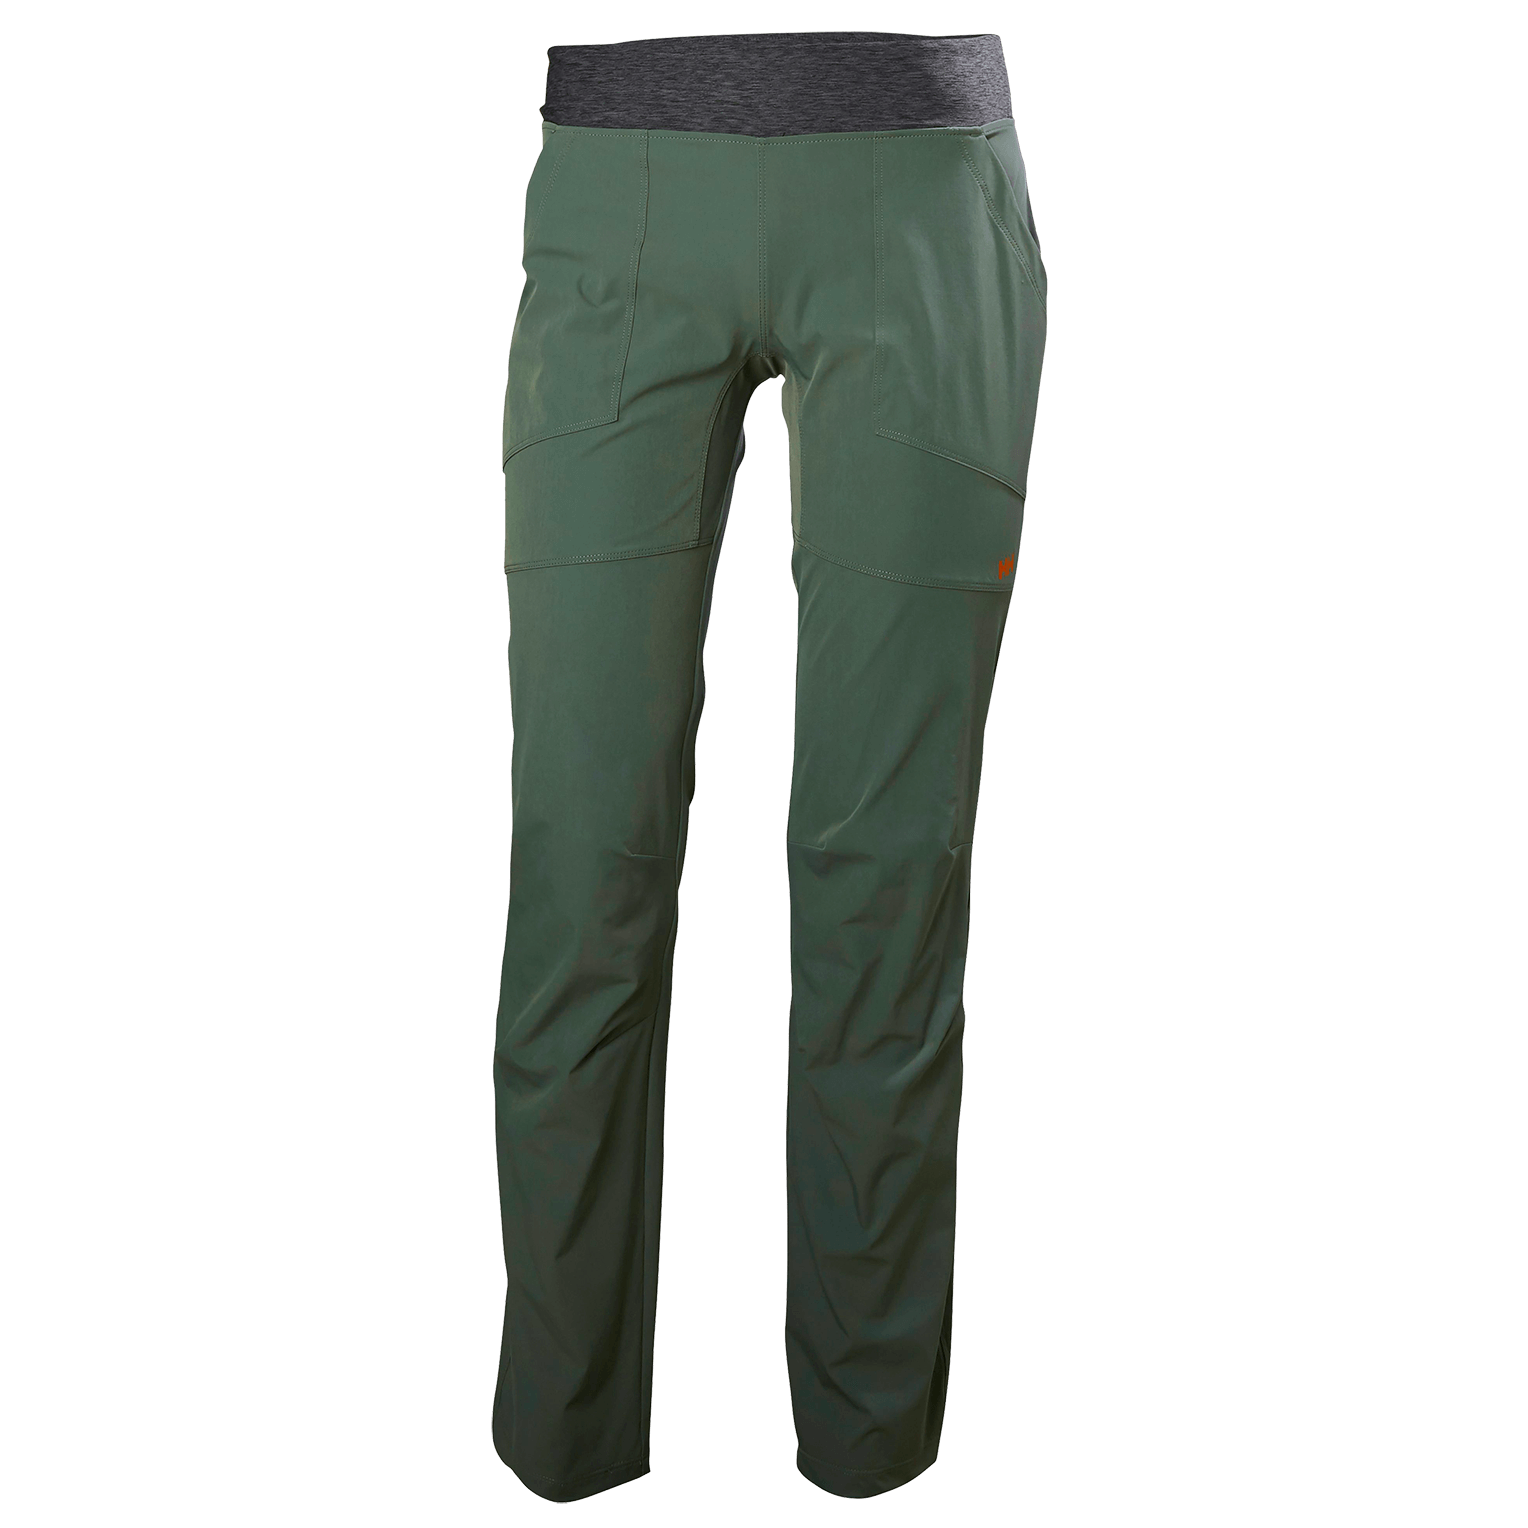 Cargo Pant PNG Image